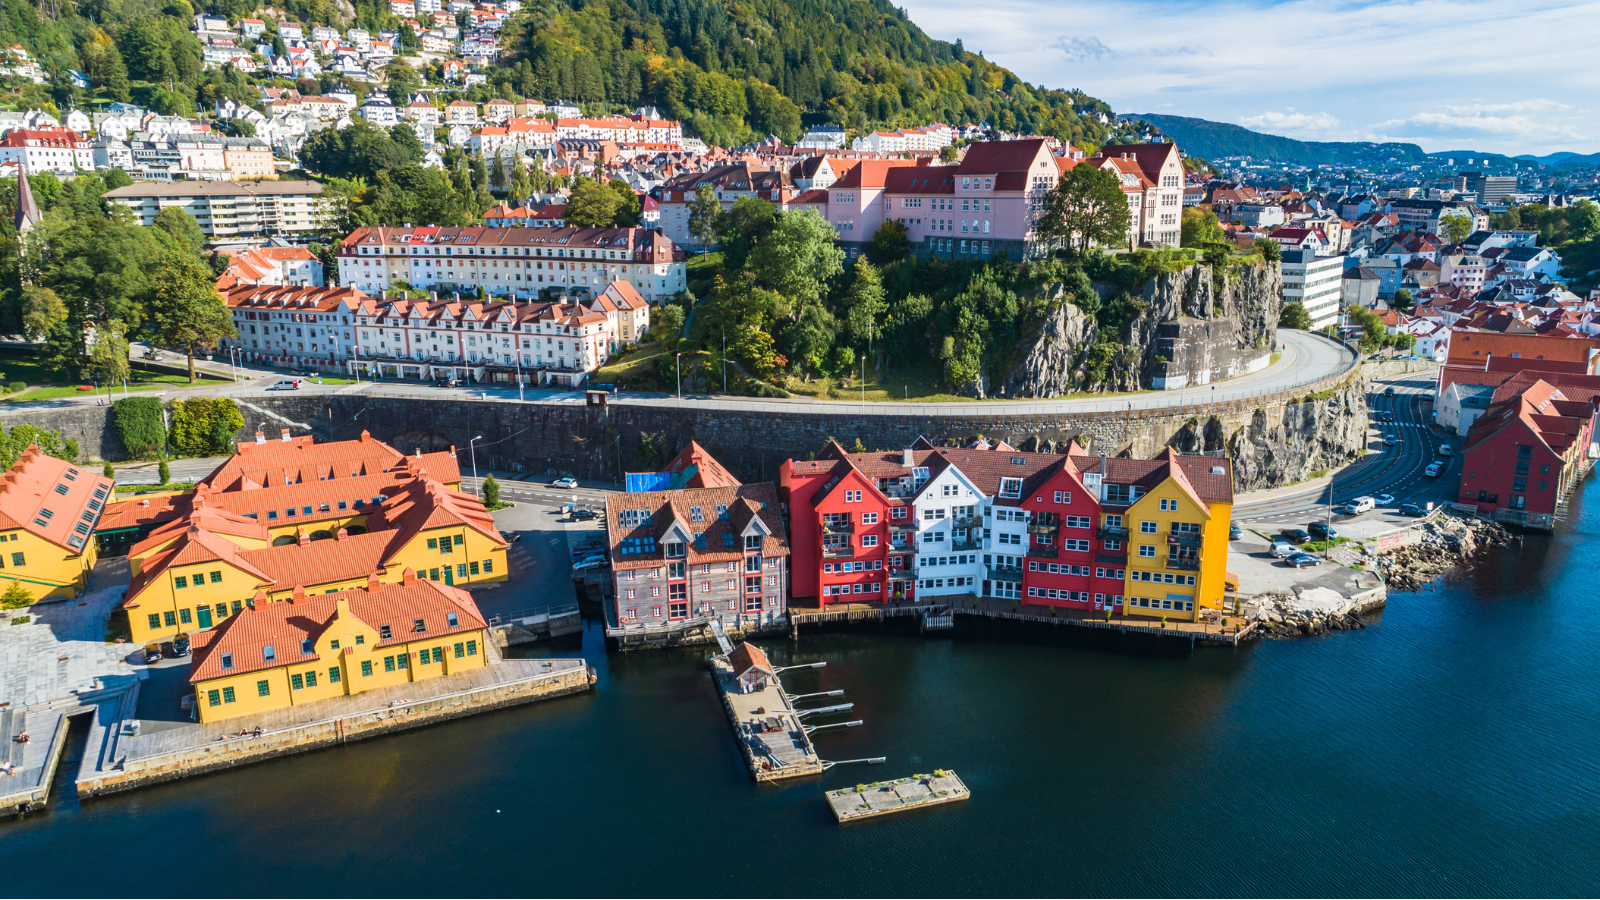 The third thing in the list of 10 best things to do in Norway - Visiting Bergen